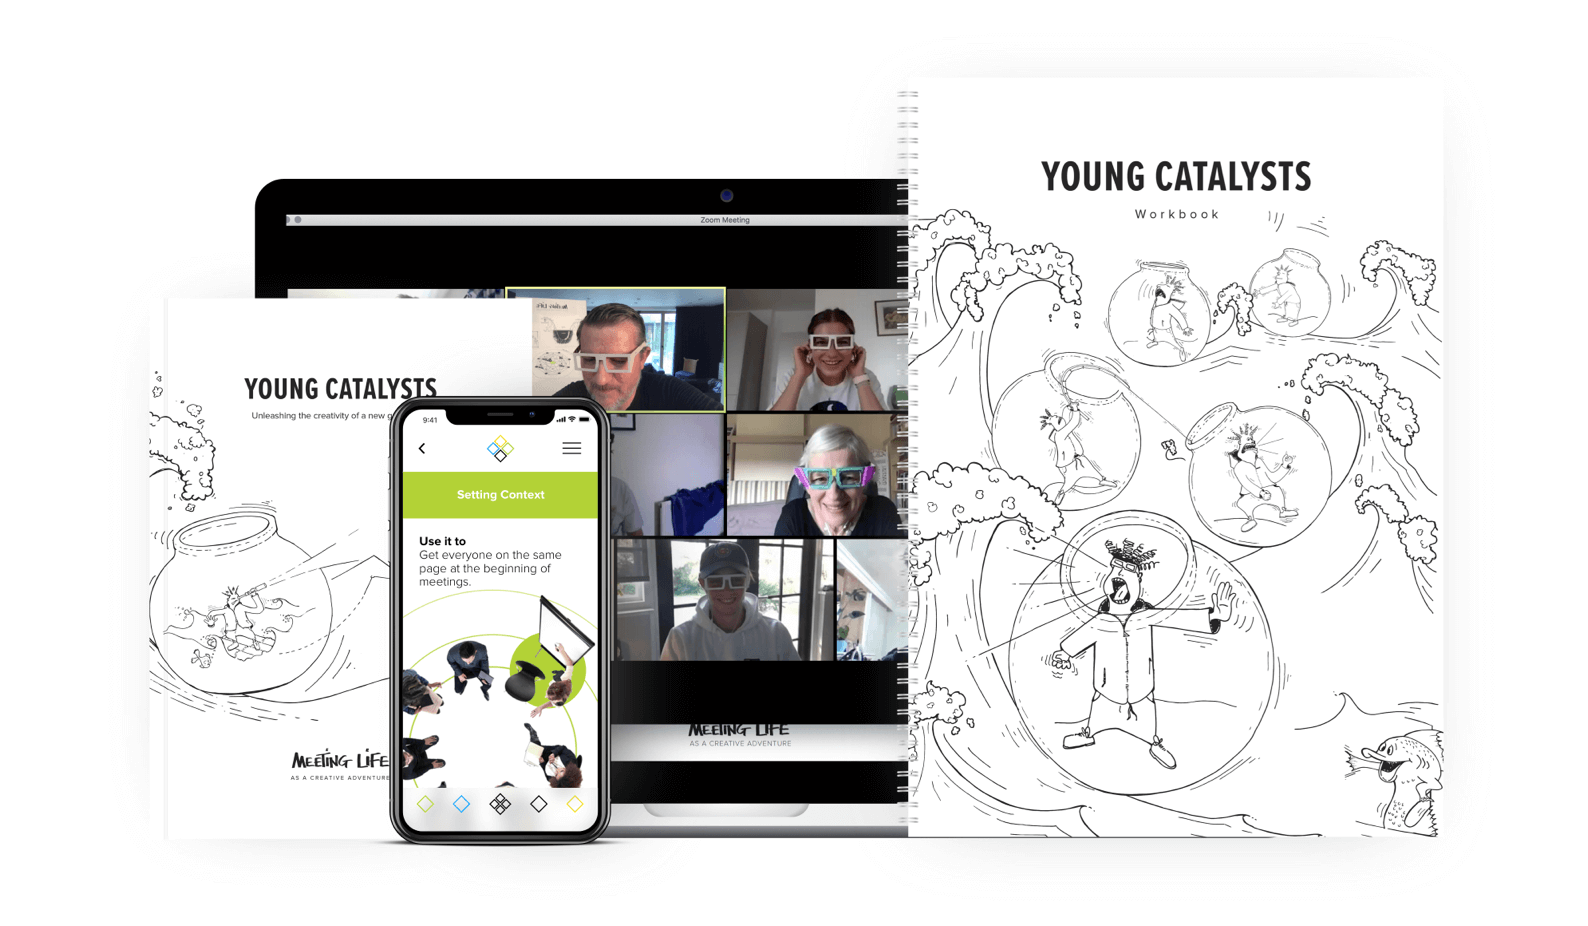 the printed and digital assets for the Young Catakyst program